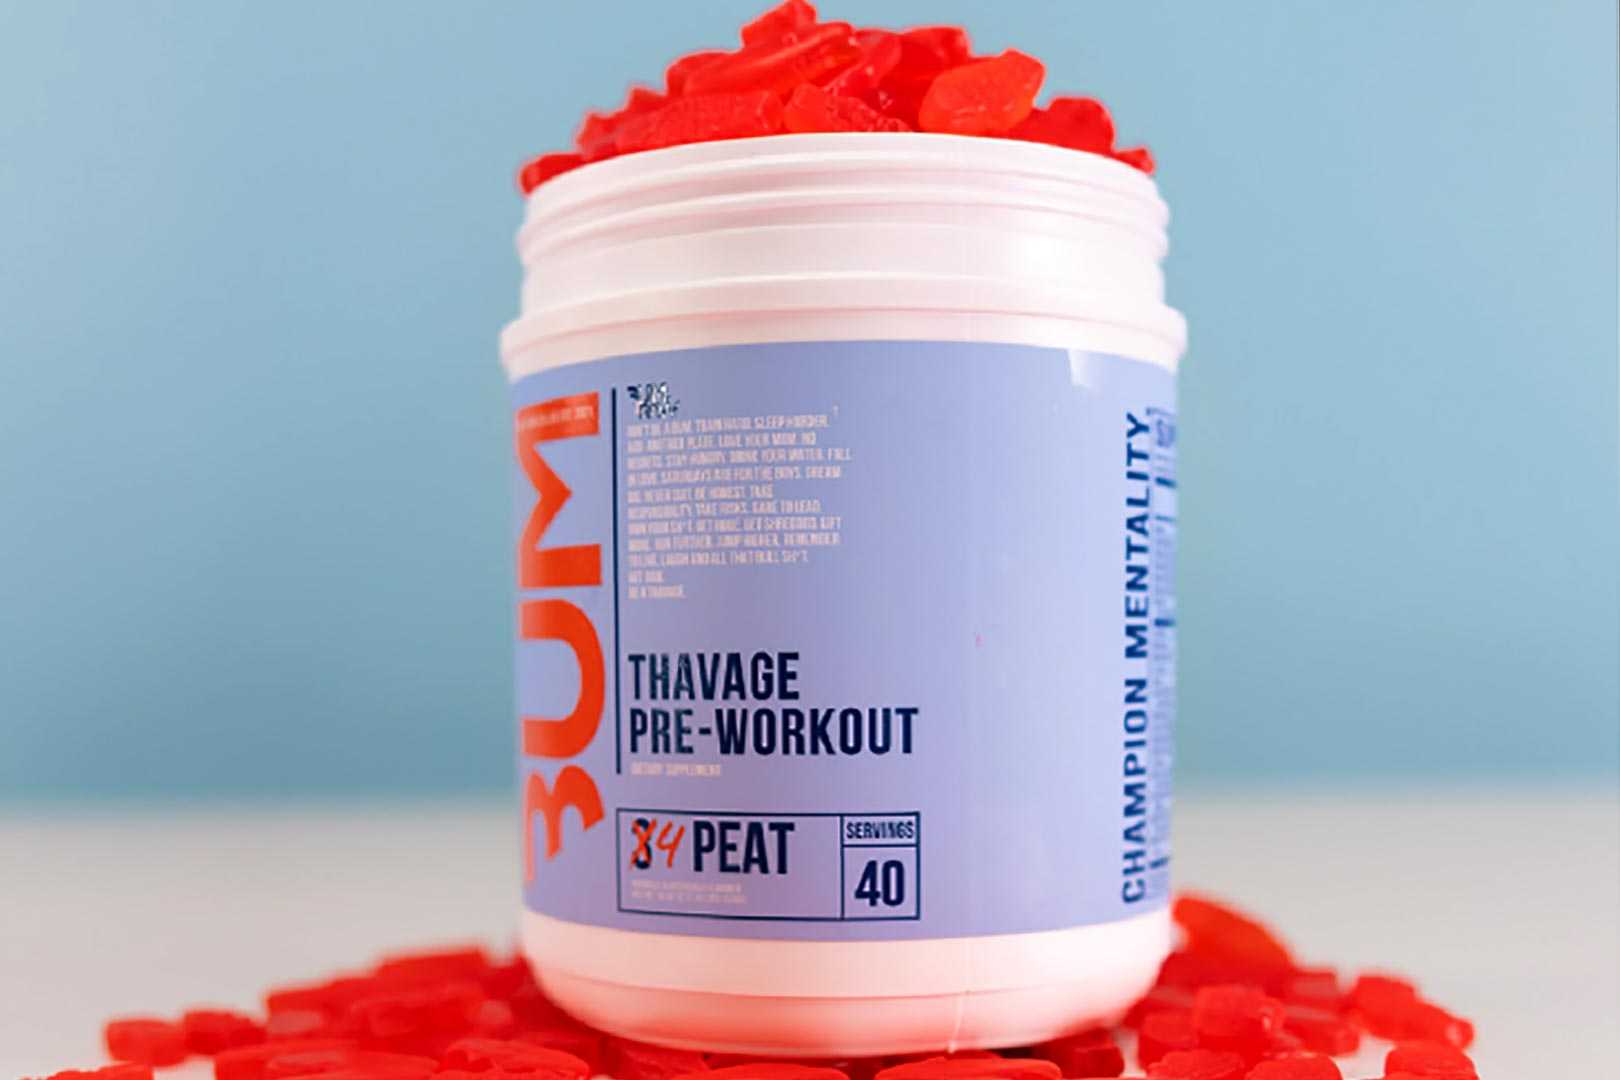 Raw Nutrition Launches 4 Peat Flavor Of Thavage